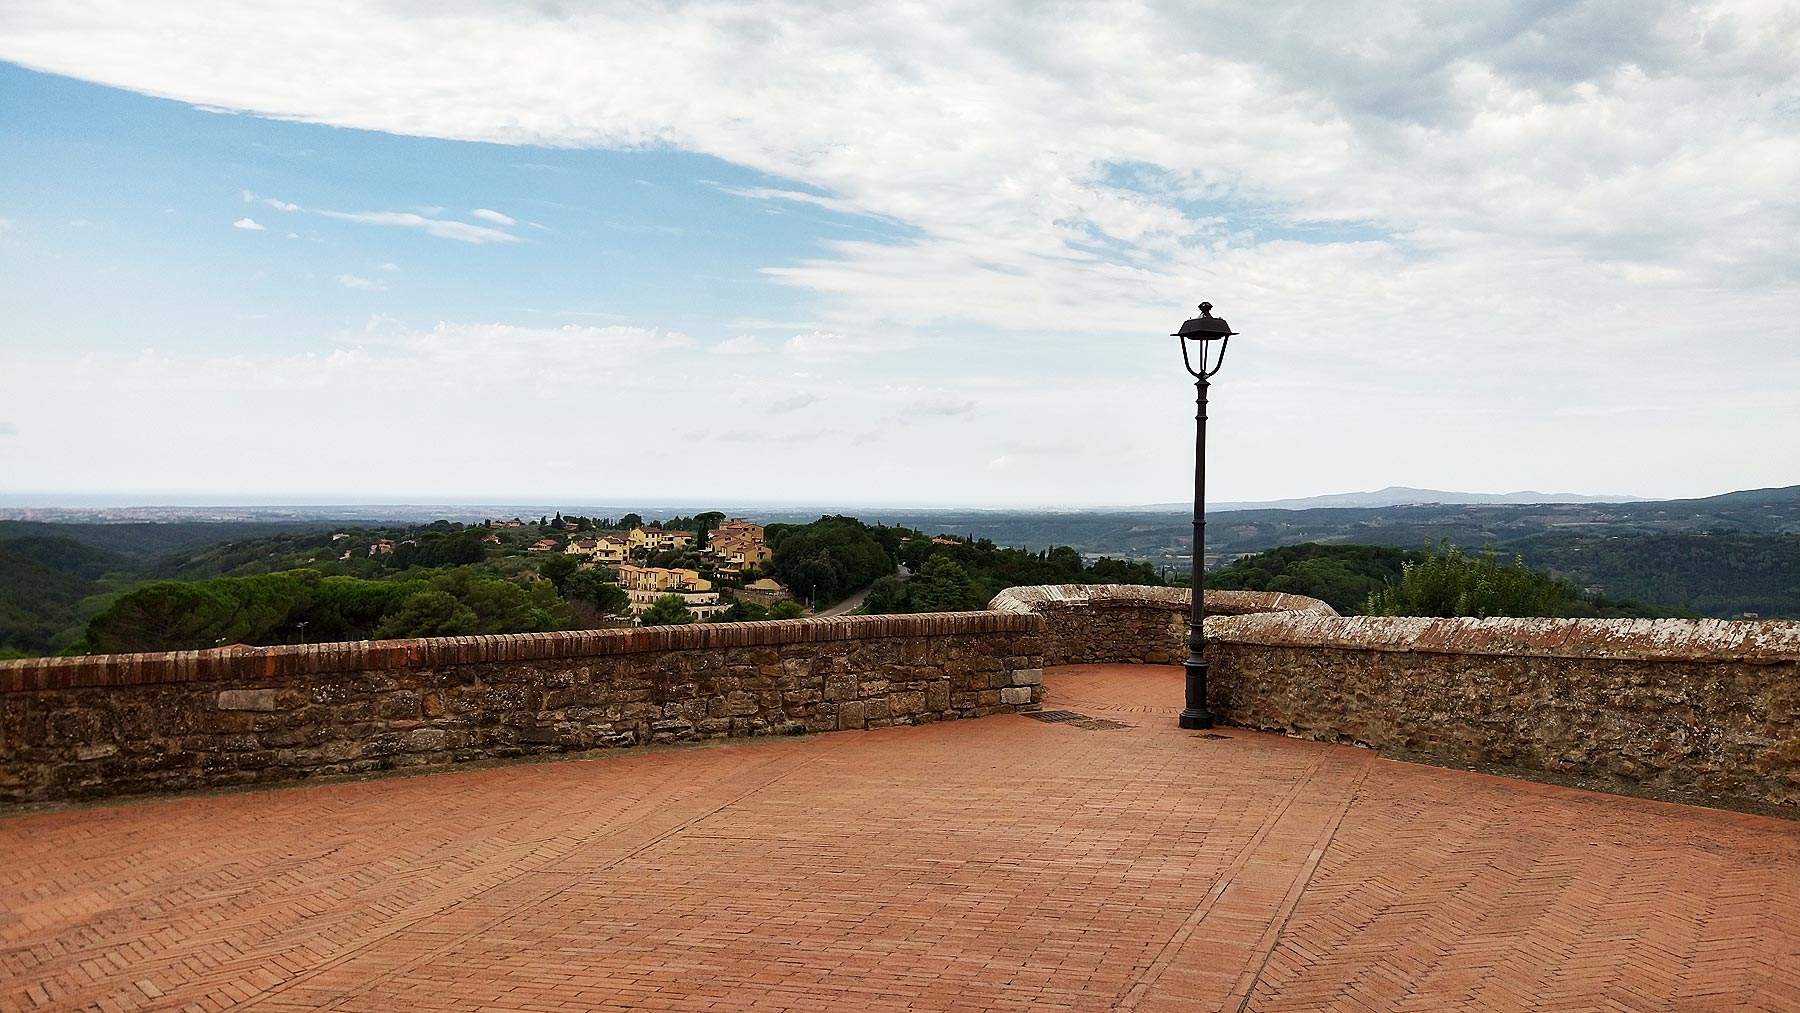 The village of Montescudaio, an ancient terrace overlooking the Cecina Valley and the sea